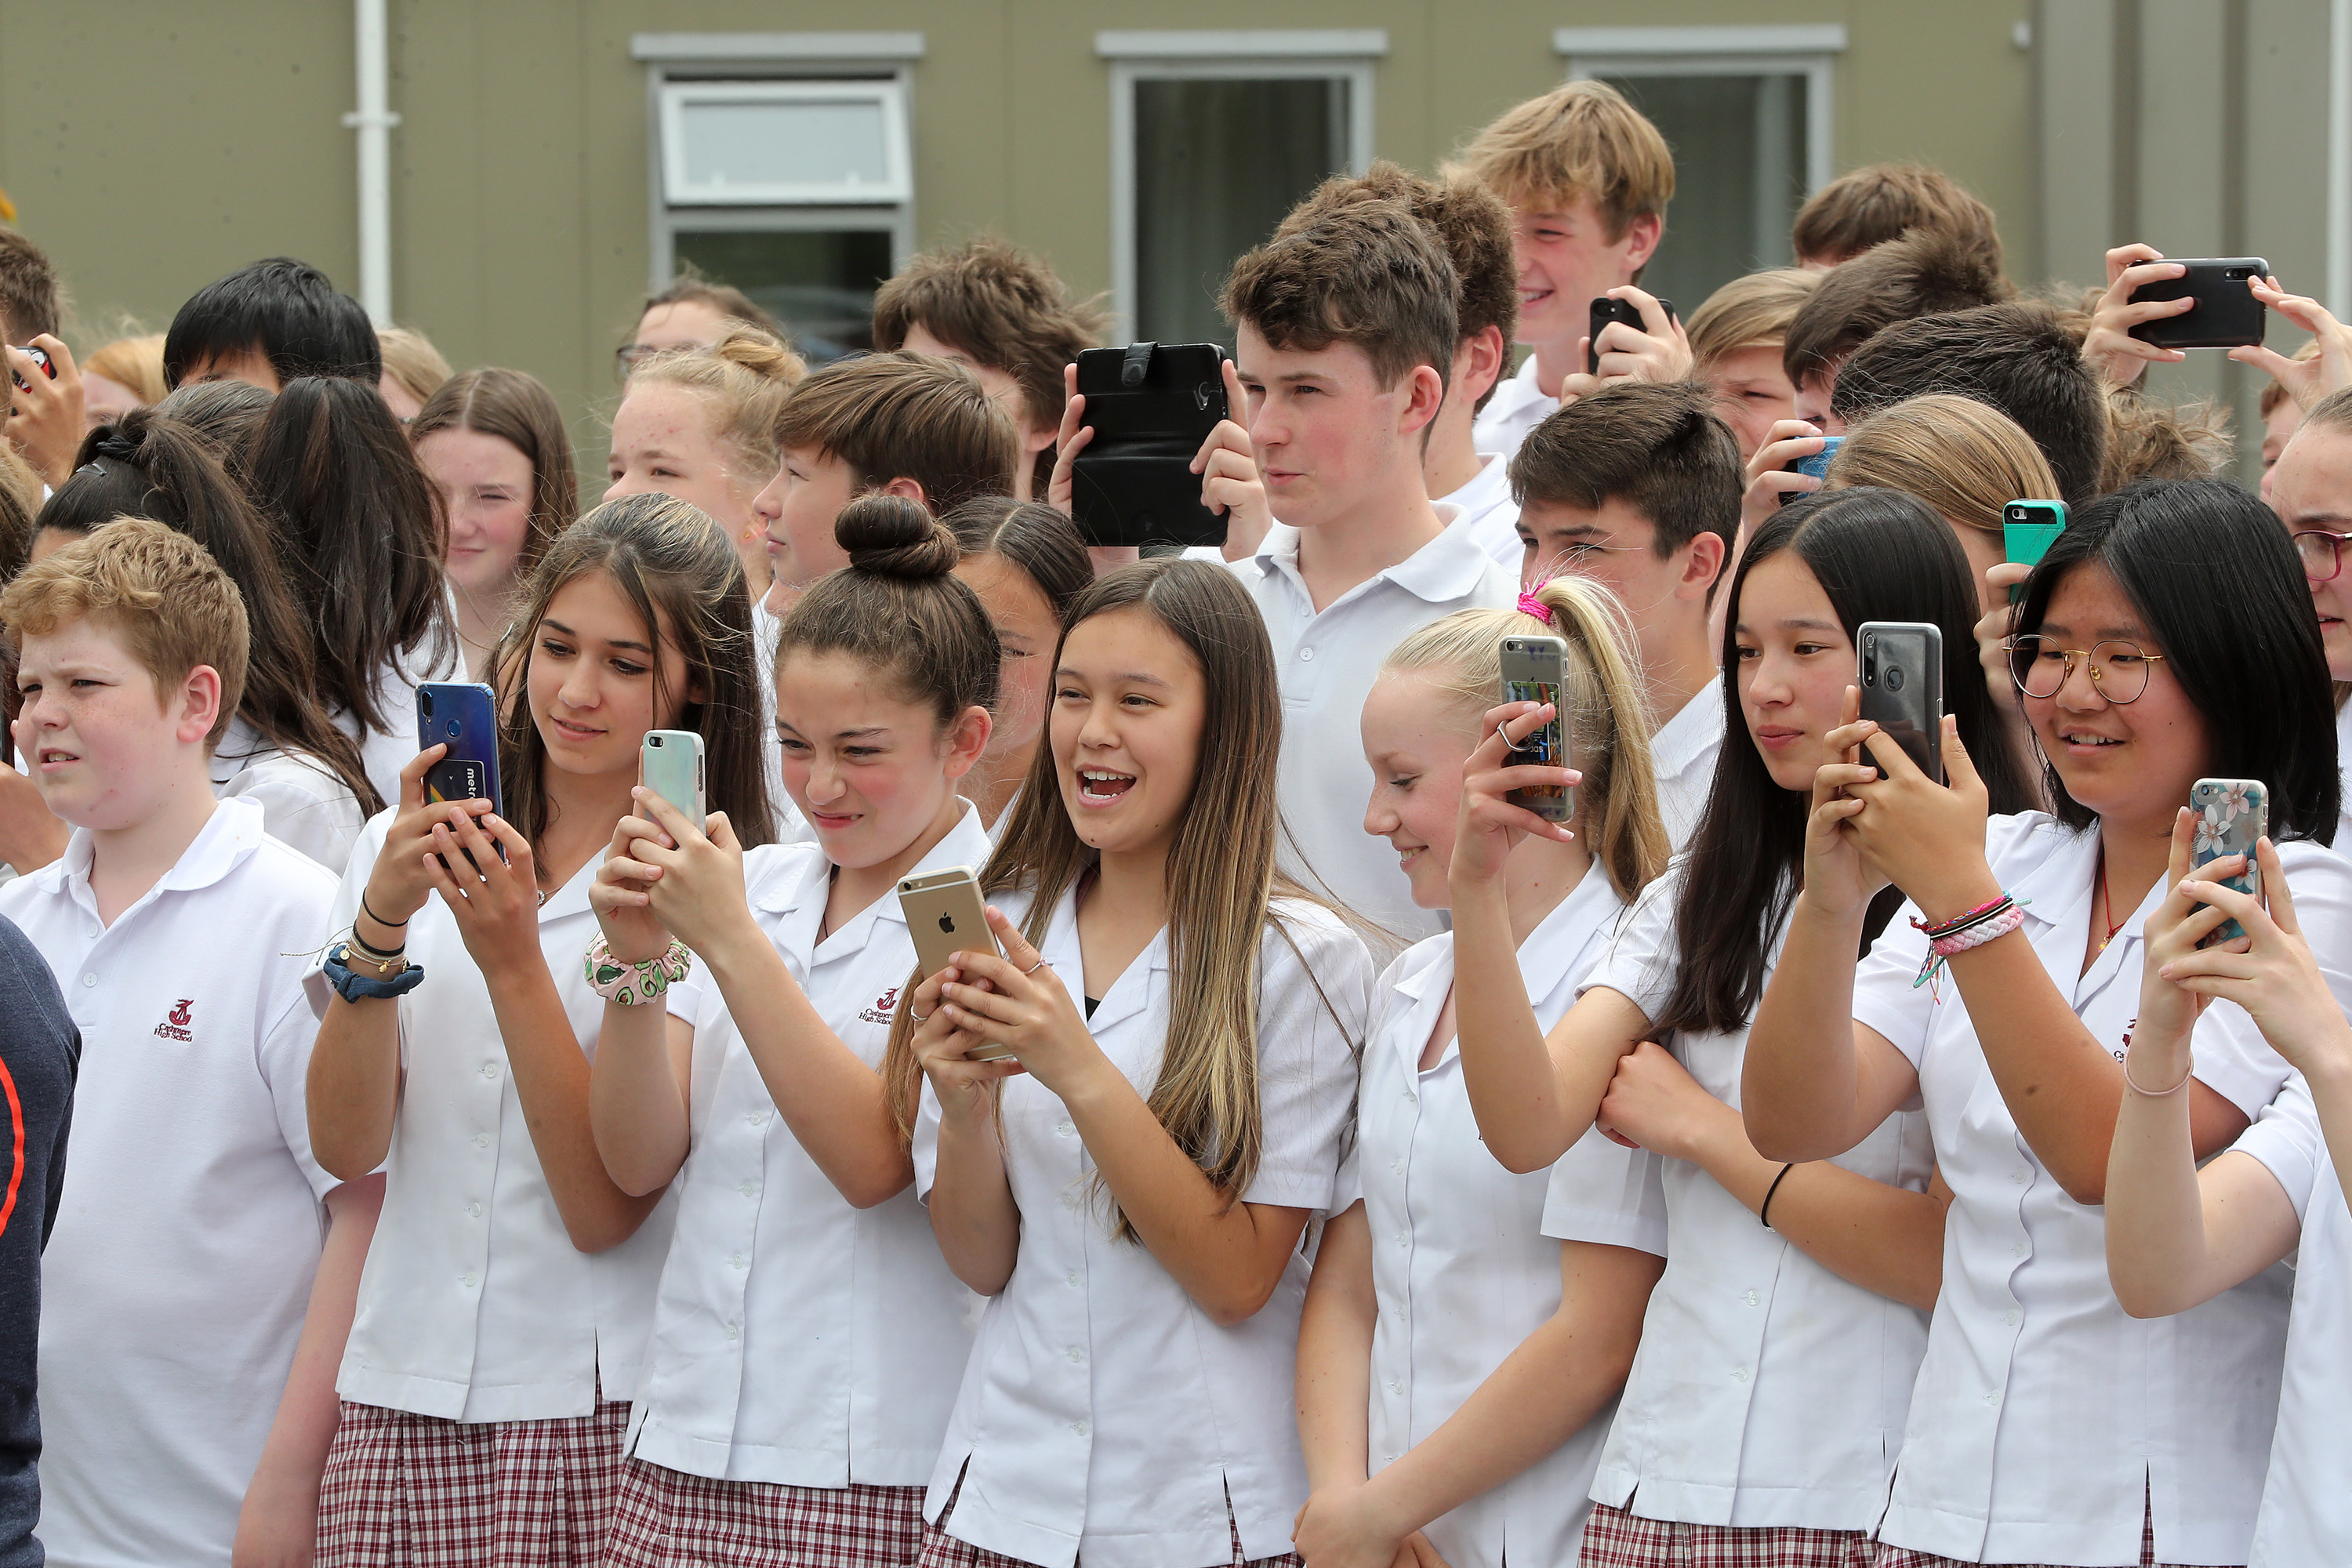 New Zealand students lined up outside of their school for a photo opportunity